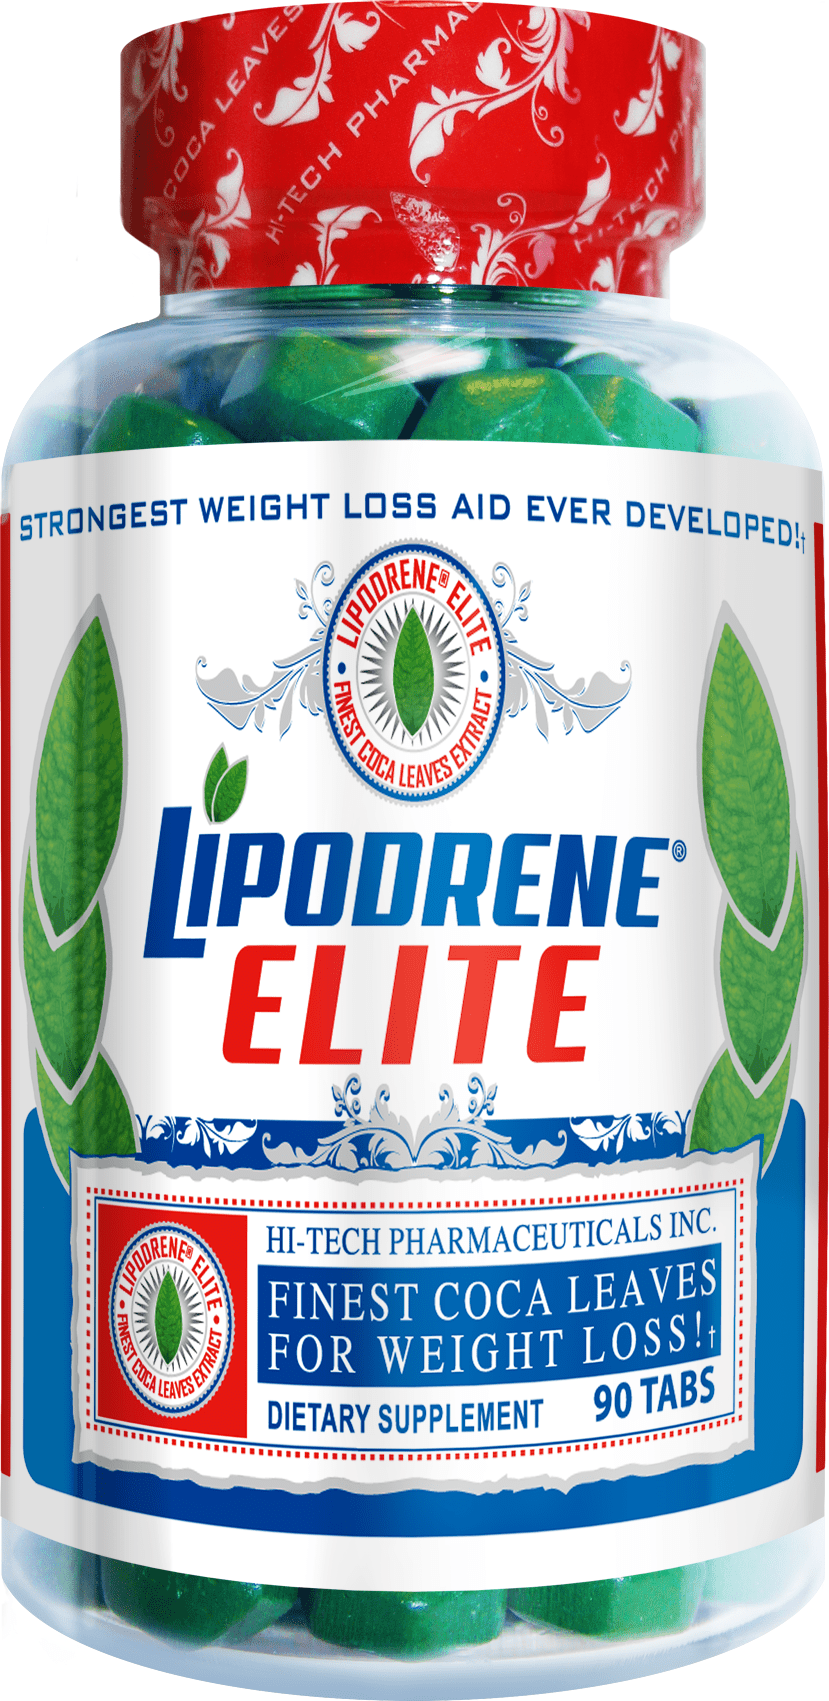 Lipodrene Elite Review - 14 Things You Need to Know